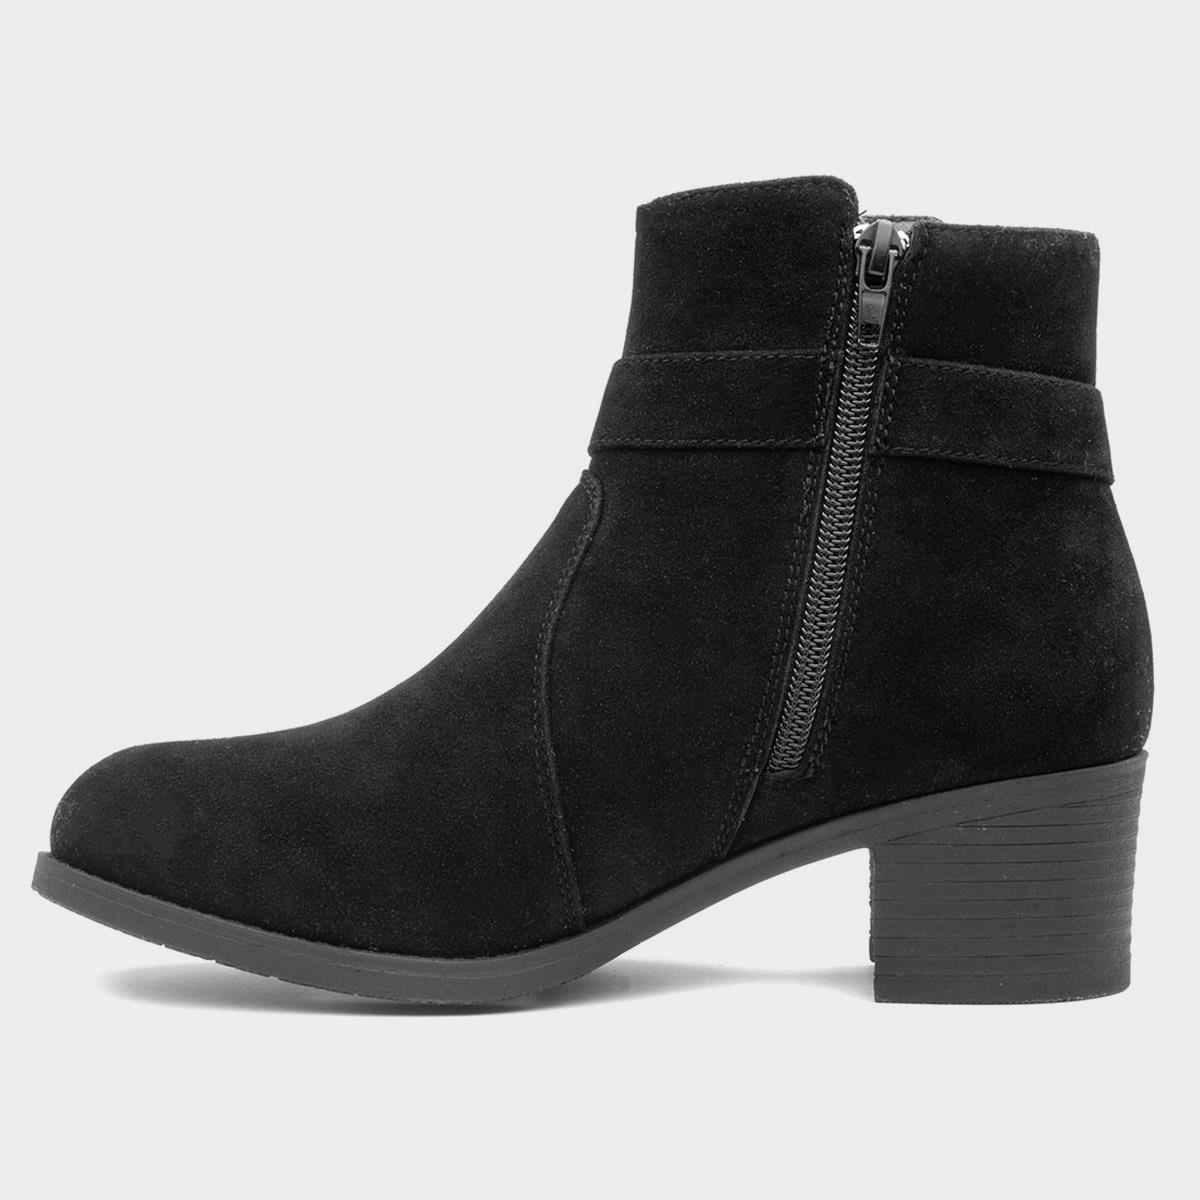 Back Loop Ankle Boots - Thelma & Thistle